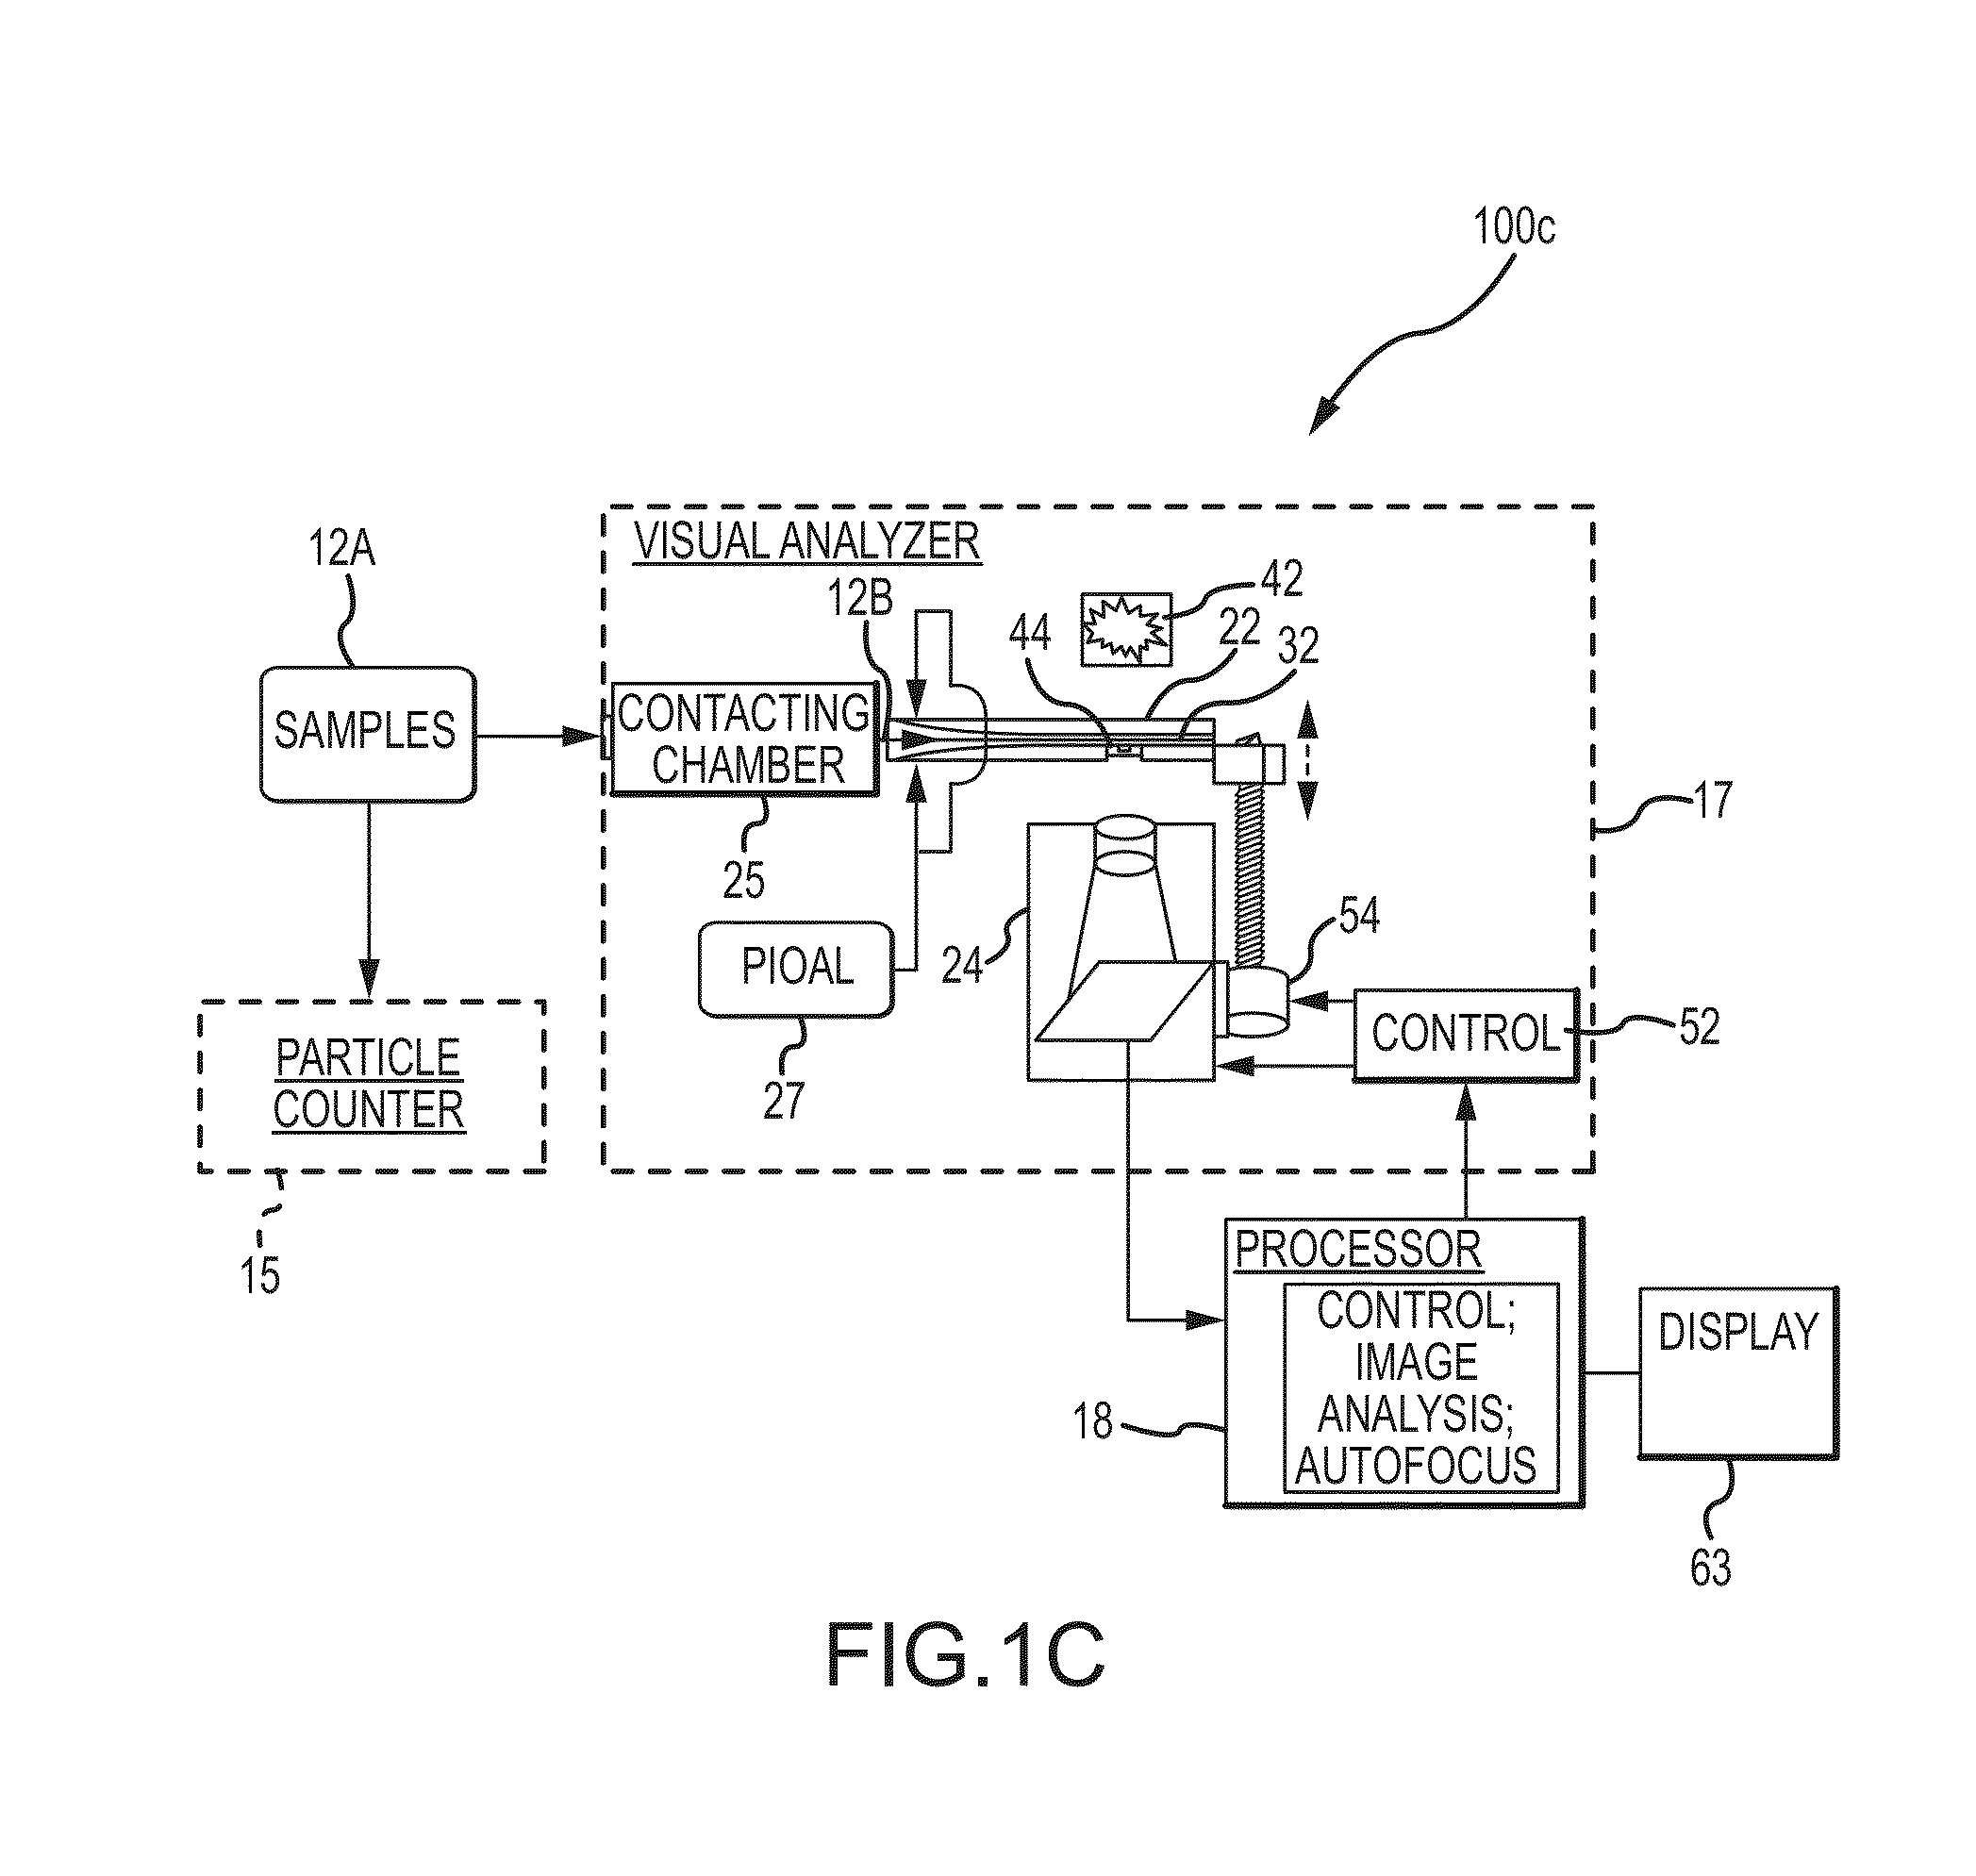 Flowcell, sheath fluid, and autofocus systems and methods for particle analysis in urine samples